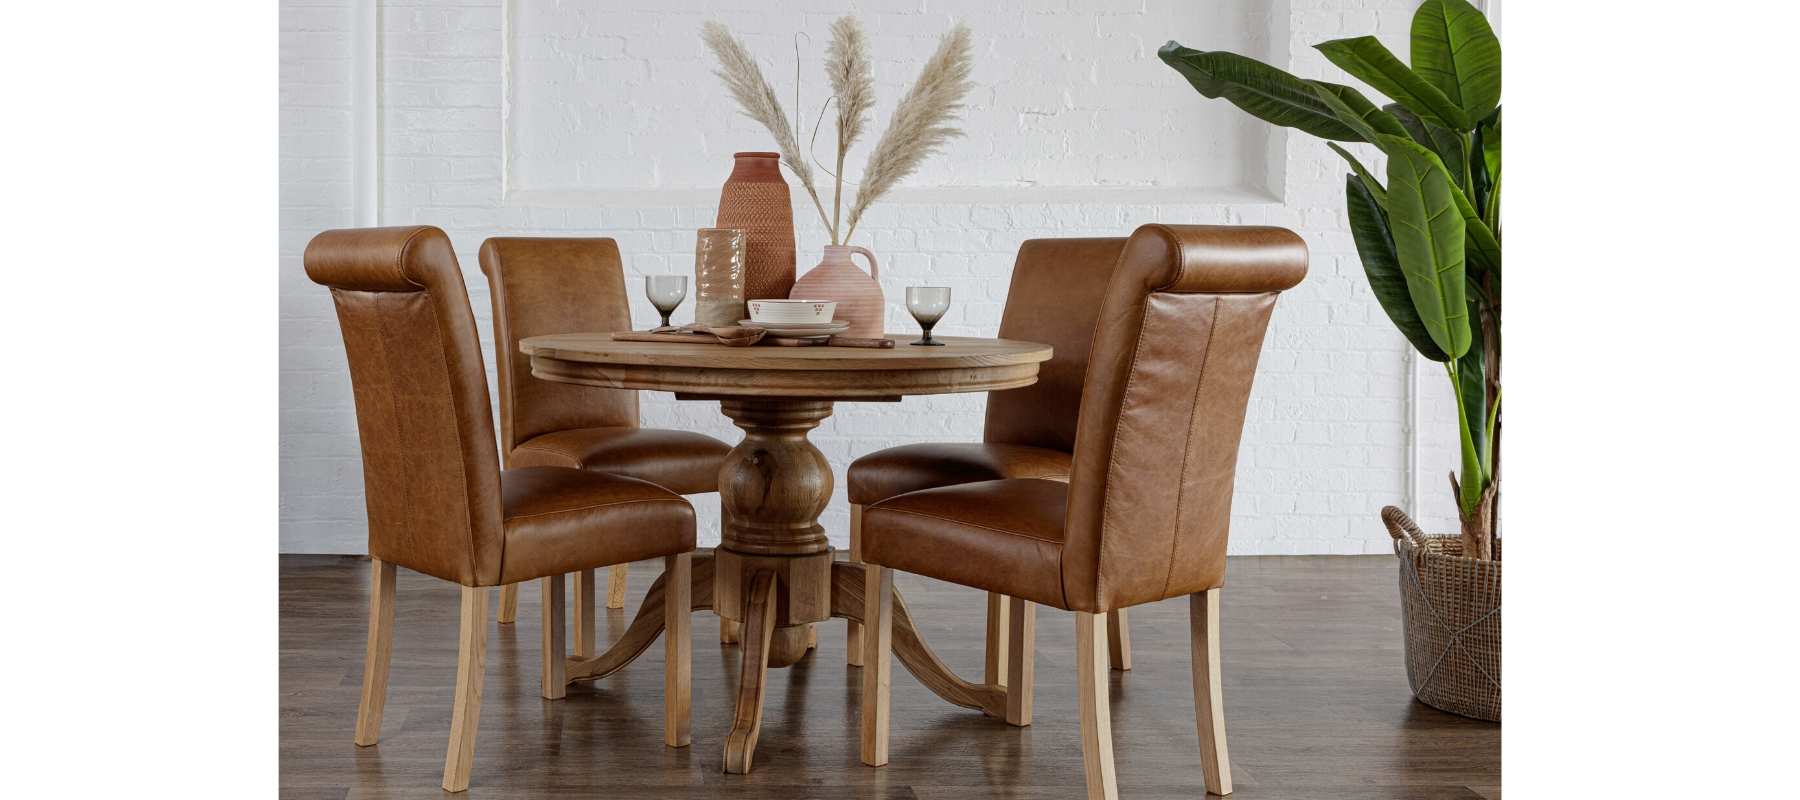 Round dining table with brown leather chairs